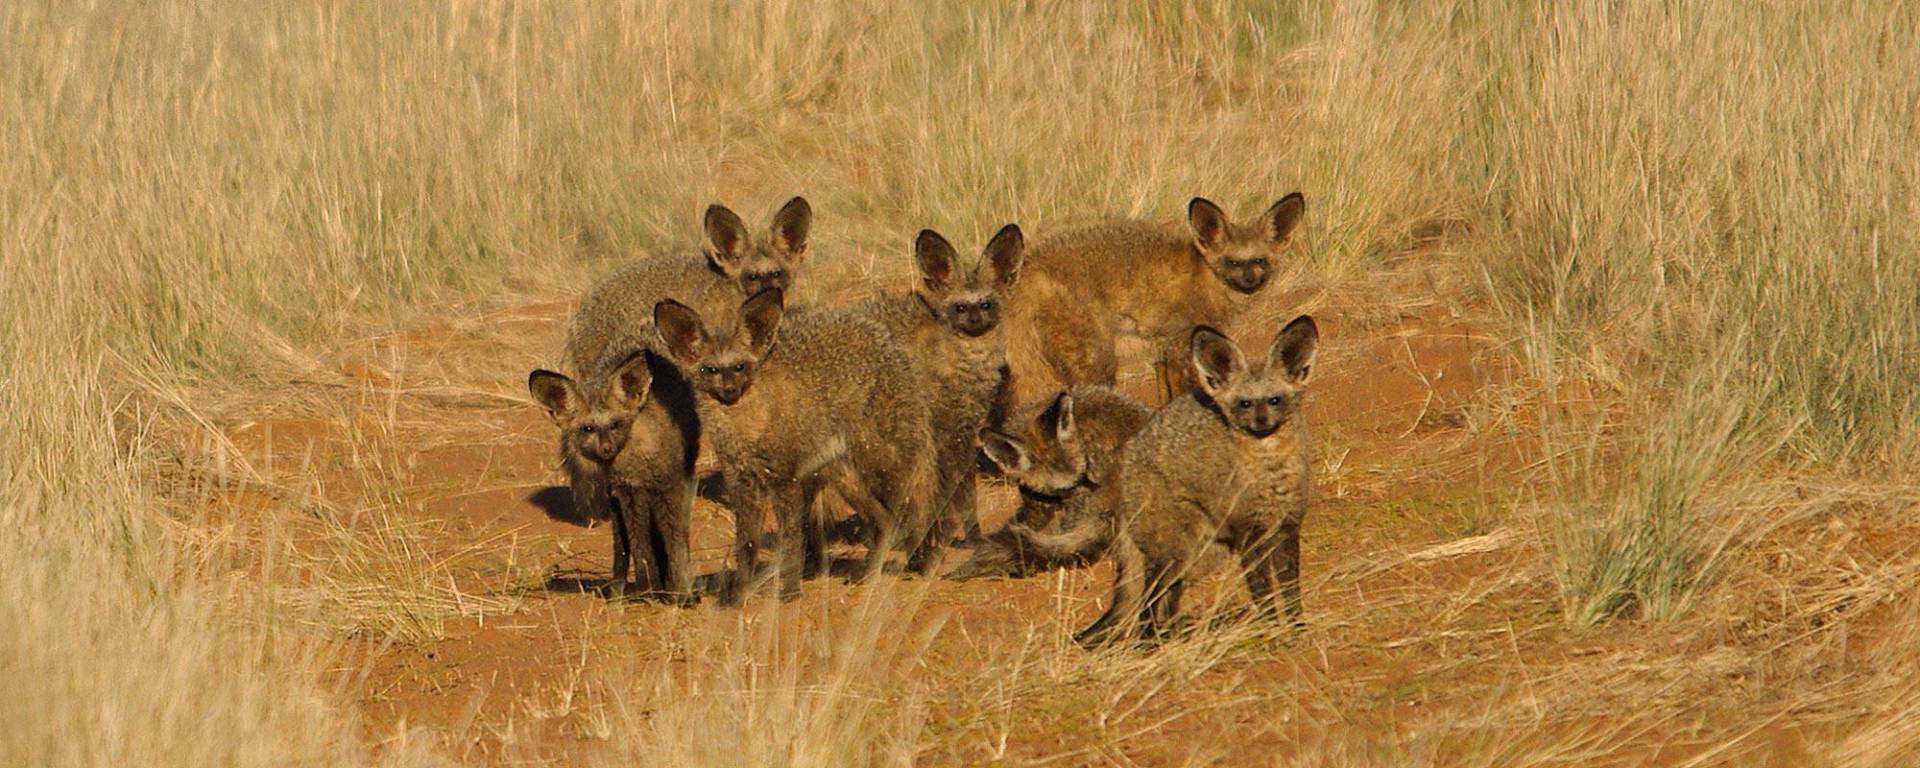 Bat eared foxes in Kalahari winter with thick fur